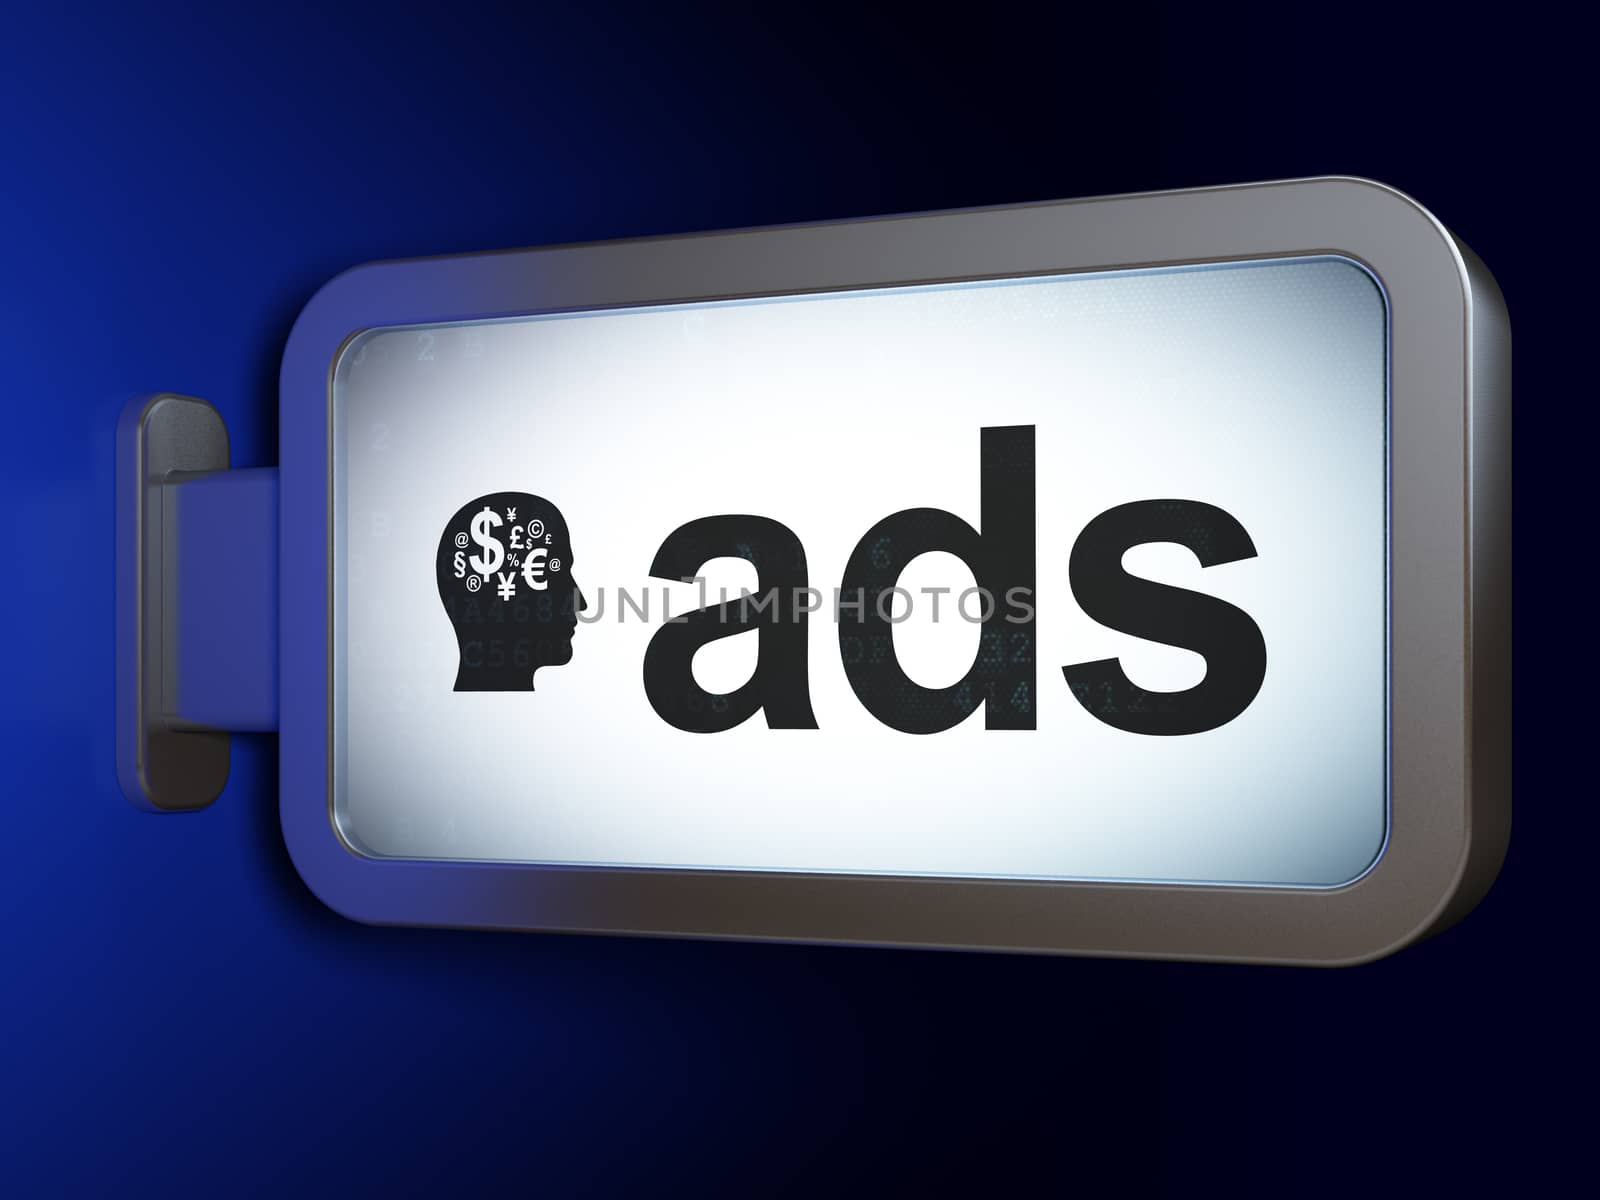 Advertising concept: Ads and Head With Finance Symbol on advertising billboard background, 3D rendering